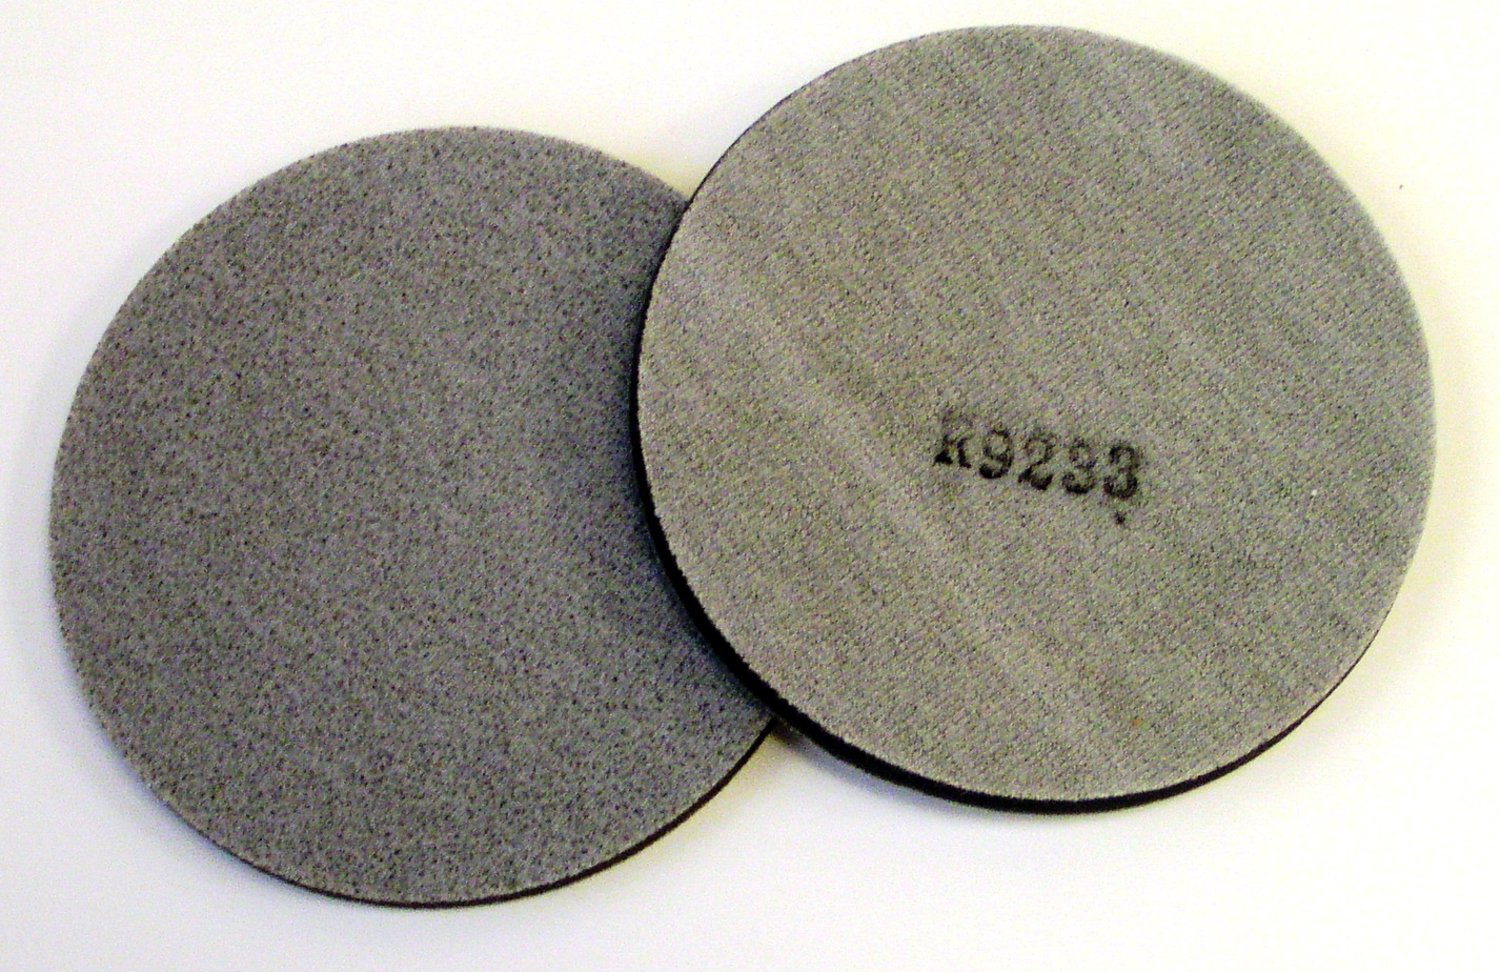 7010328334 - 3M Stikit Soft Interface Disc Pad 02795, 5 in x 1/2 in, 25/Bag, 100
ea/Case